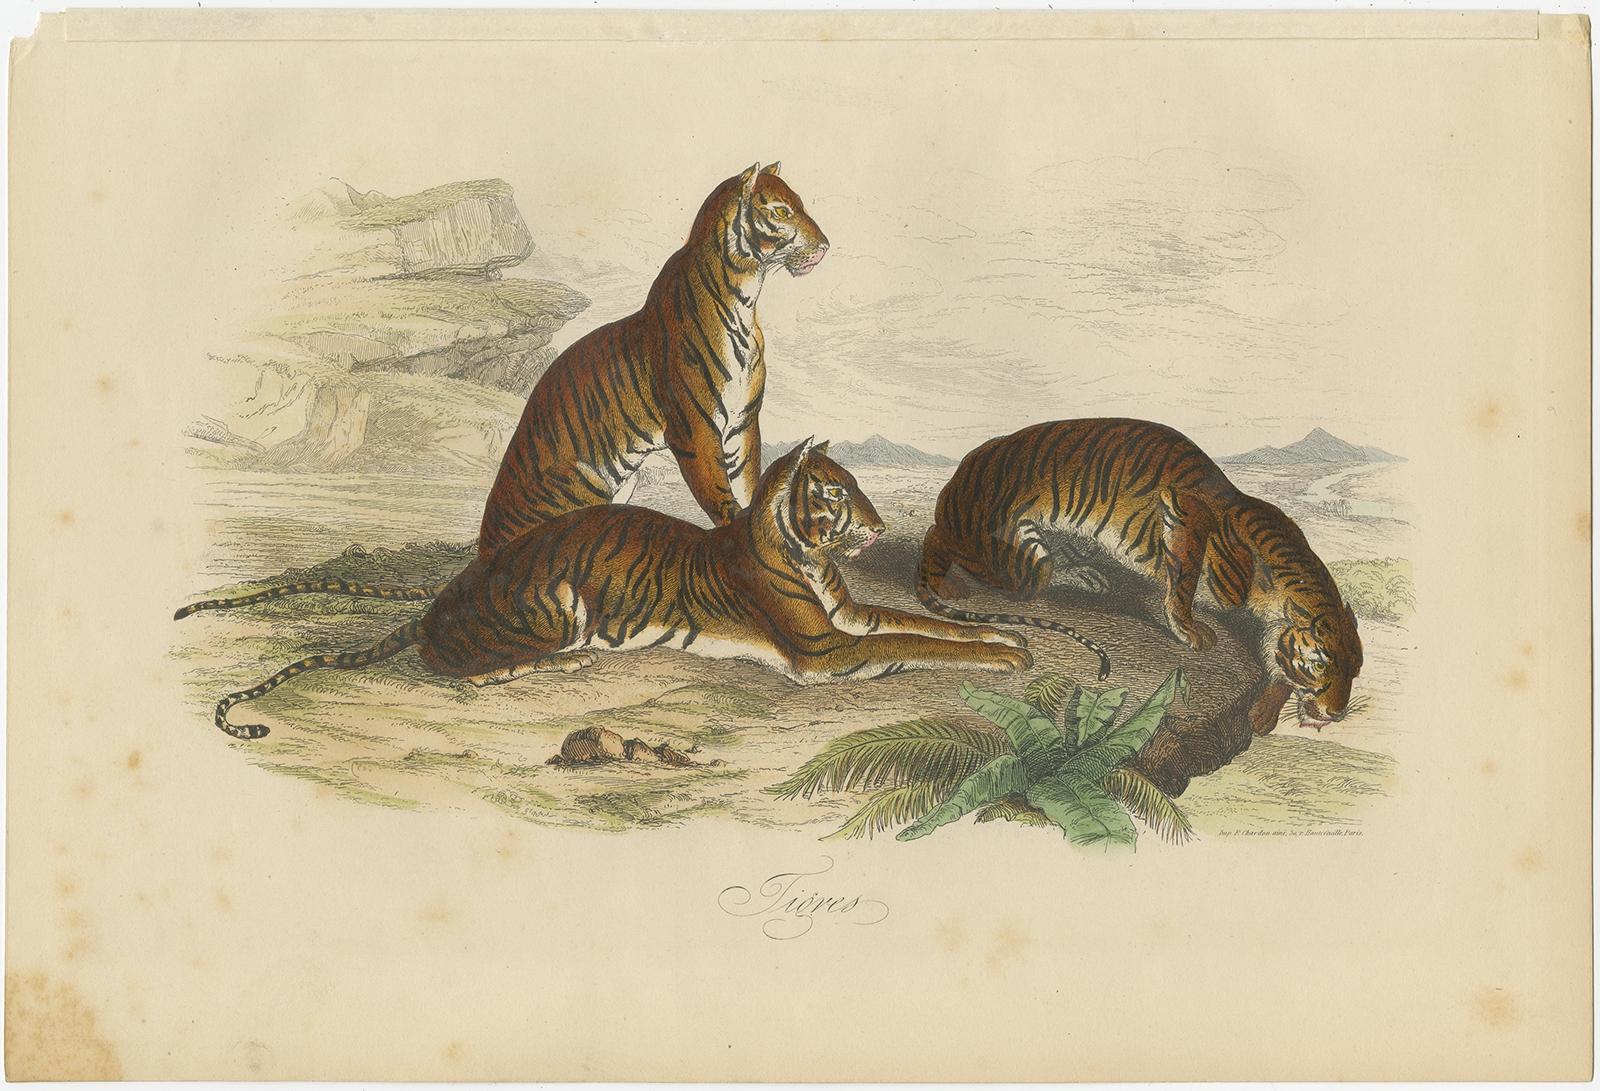 Antique print titled 'Tigres'. Print of tigers. This print originates from 'Musée d'Histoire Naturelle' by M. Achille Comte. 

Artists and Engravers: Published by Gustave Havard. 
 